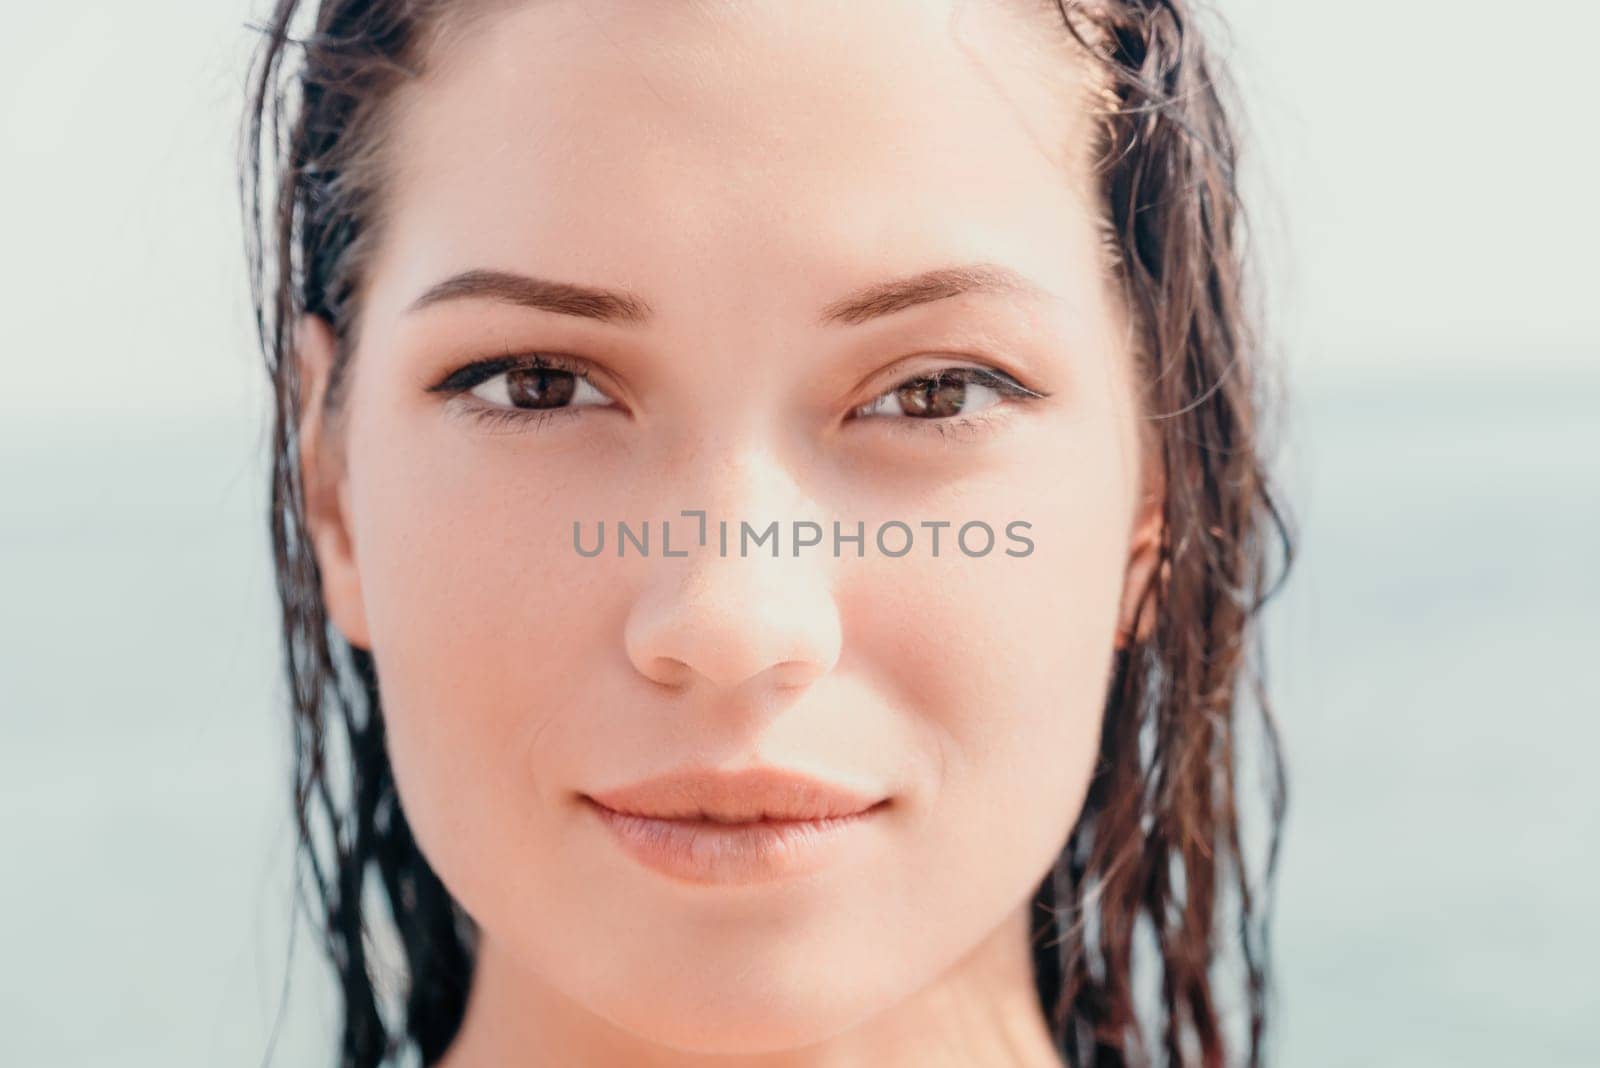 Woman sea sup. Close up portrait of beautiful young caucasian woman with black hair and freckles looking at camera and smiling. Cute woman portrait in a pink bikini posing on sup board in the sea